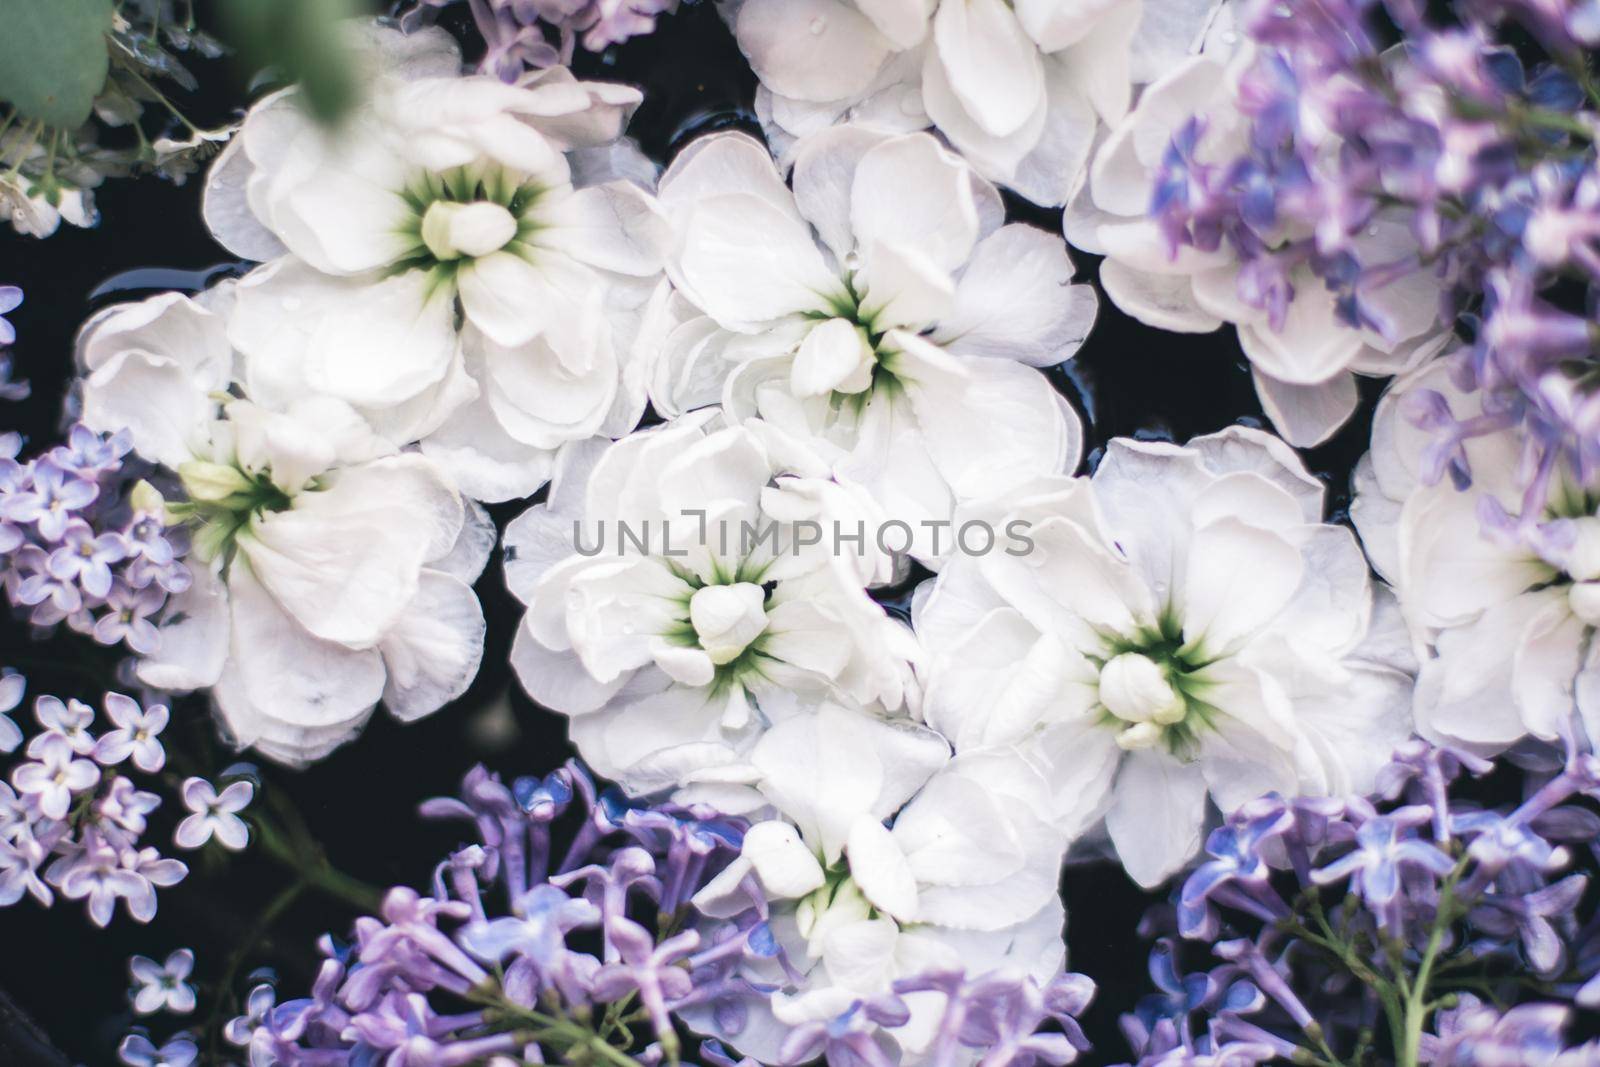 Pretty flowers in springtime - botanical backgrounds, spring and summer nature and dream garden concept. Floral beauty in bloom